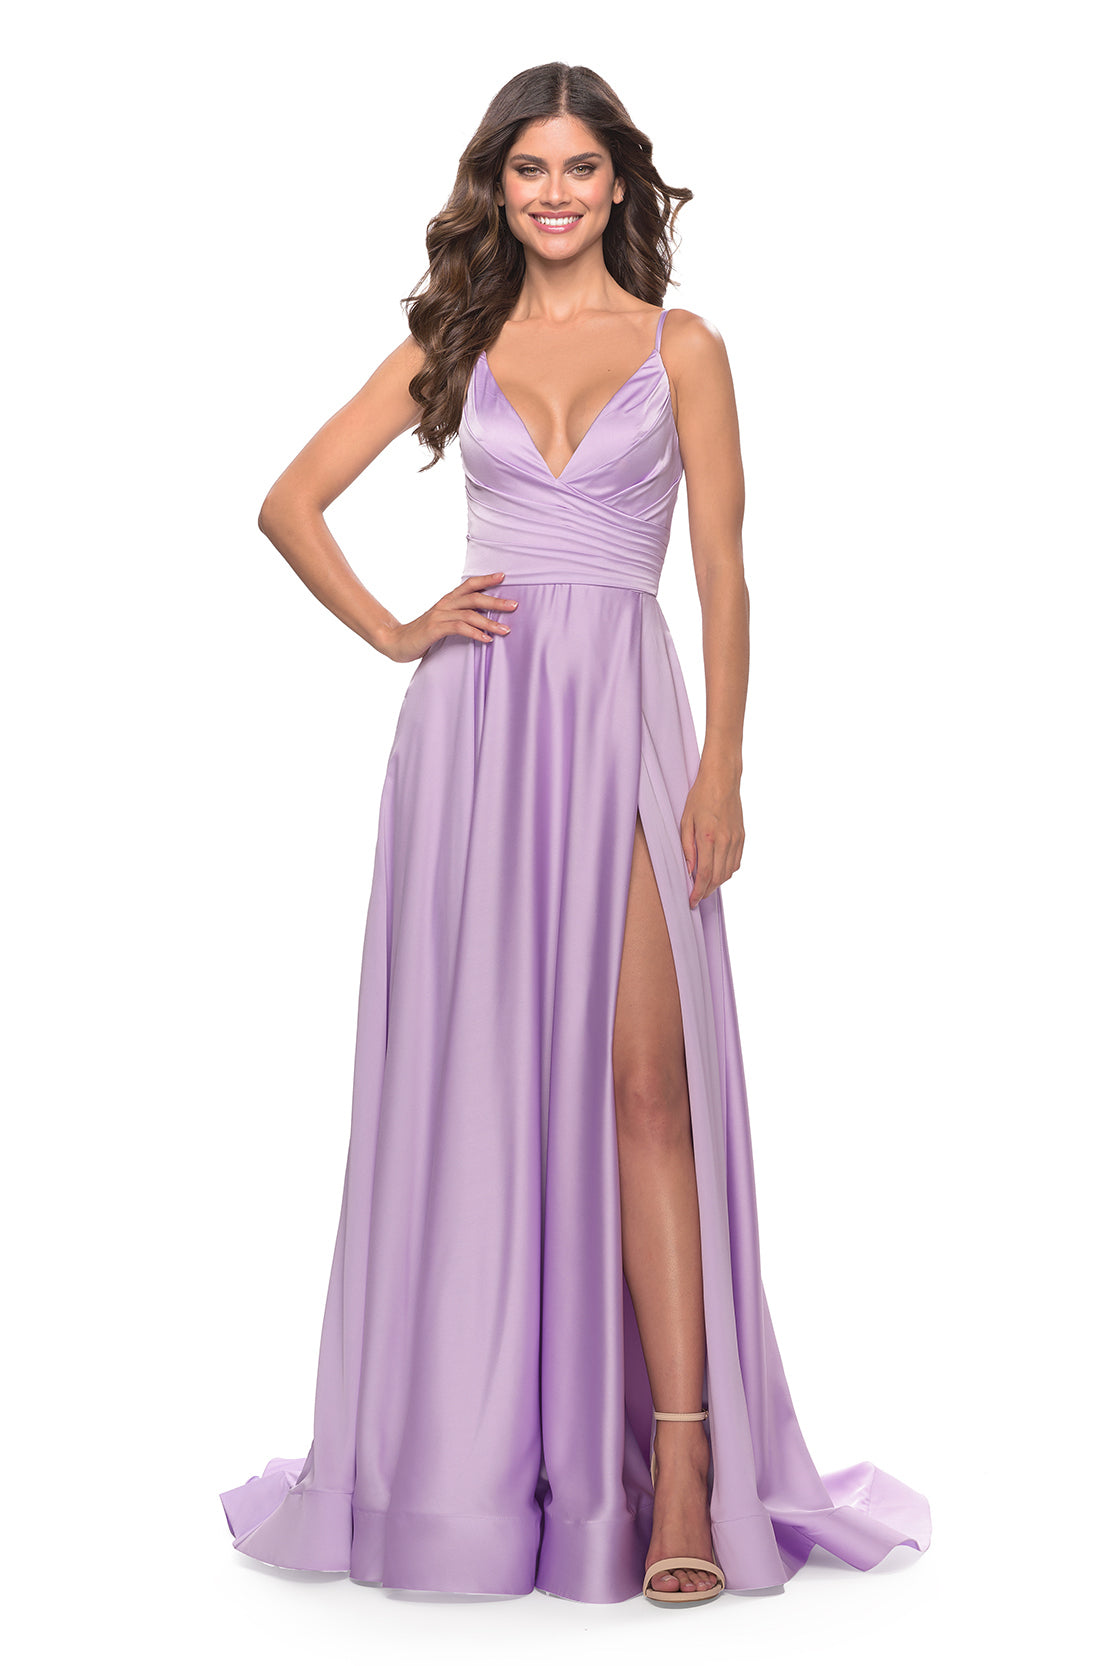 La Femme 31505 A-Line Satin Gown - A captivating A-line satin gown with a ruched bodice, V-neckline, and daring high slit, perfect for making a statement at prom.